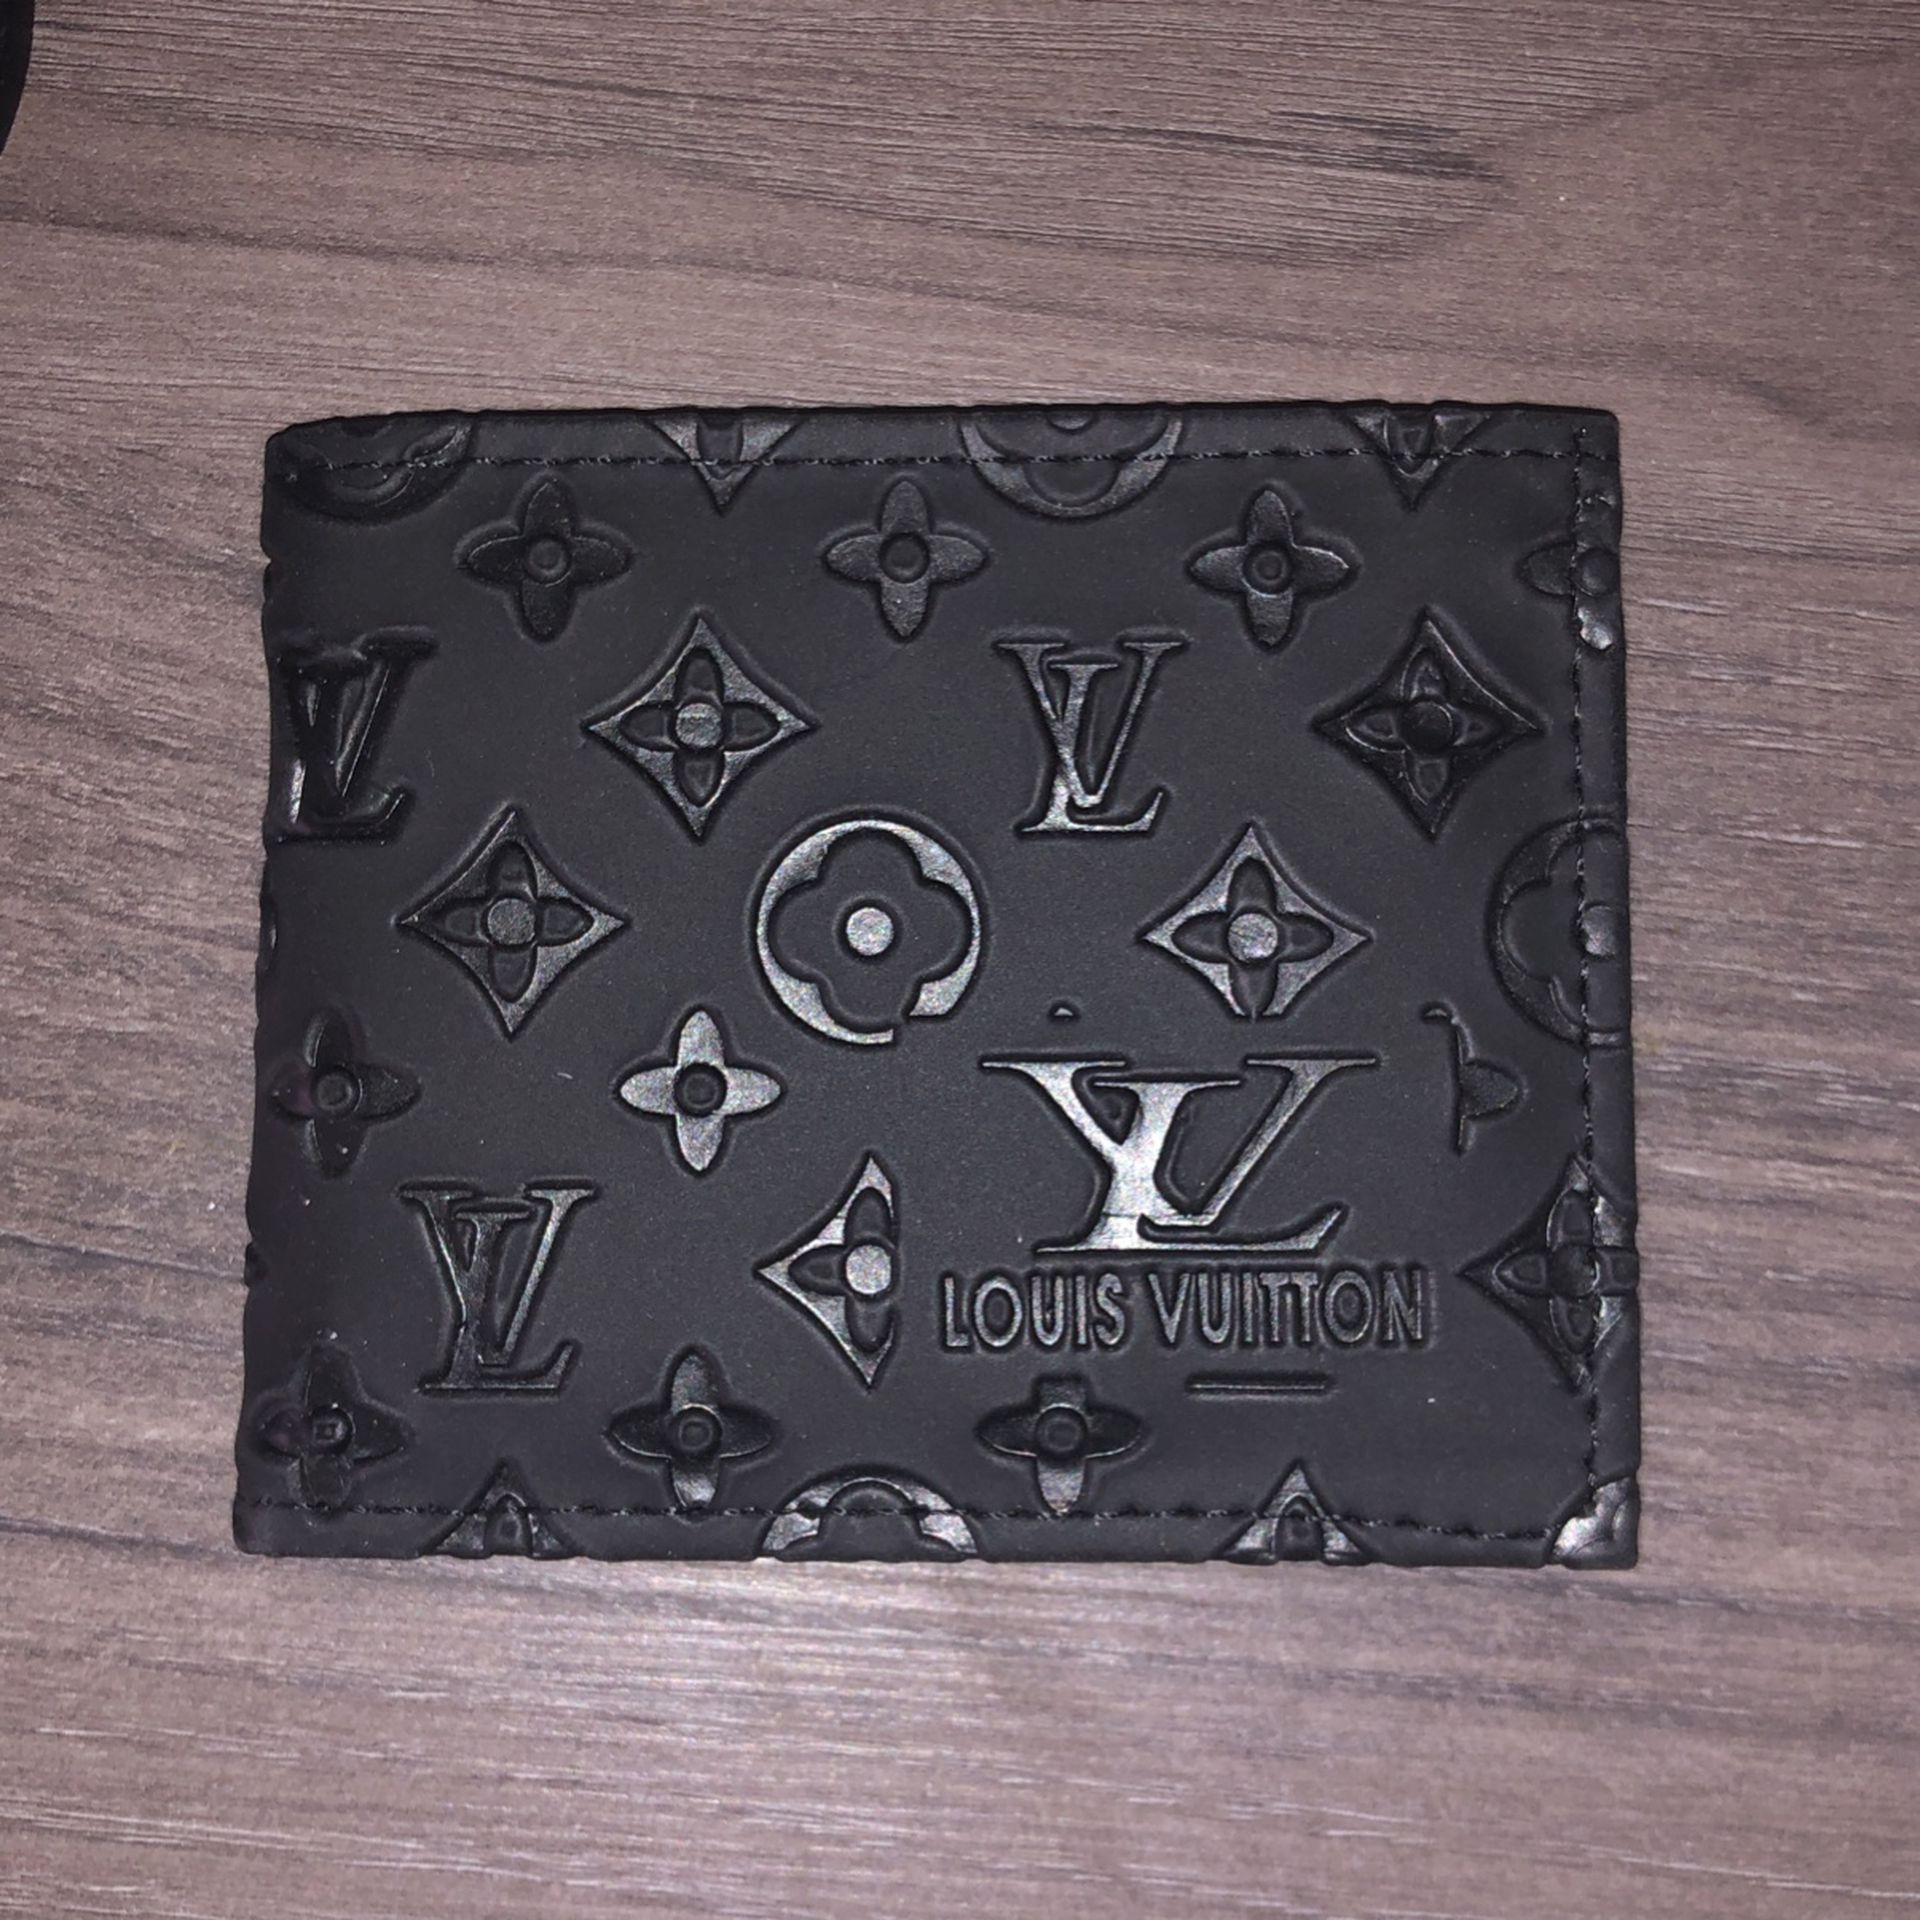 Louis Vuitton Lighter Case for Sale in Daly City, CA - OfferUp